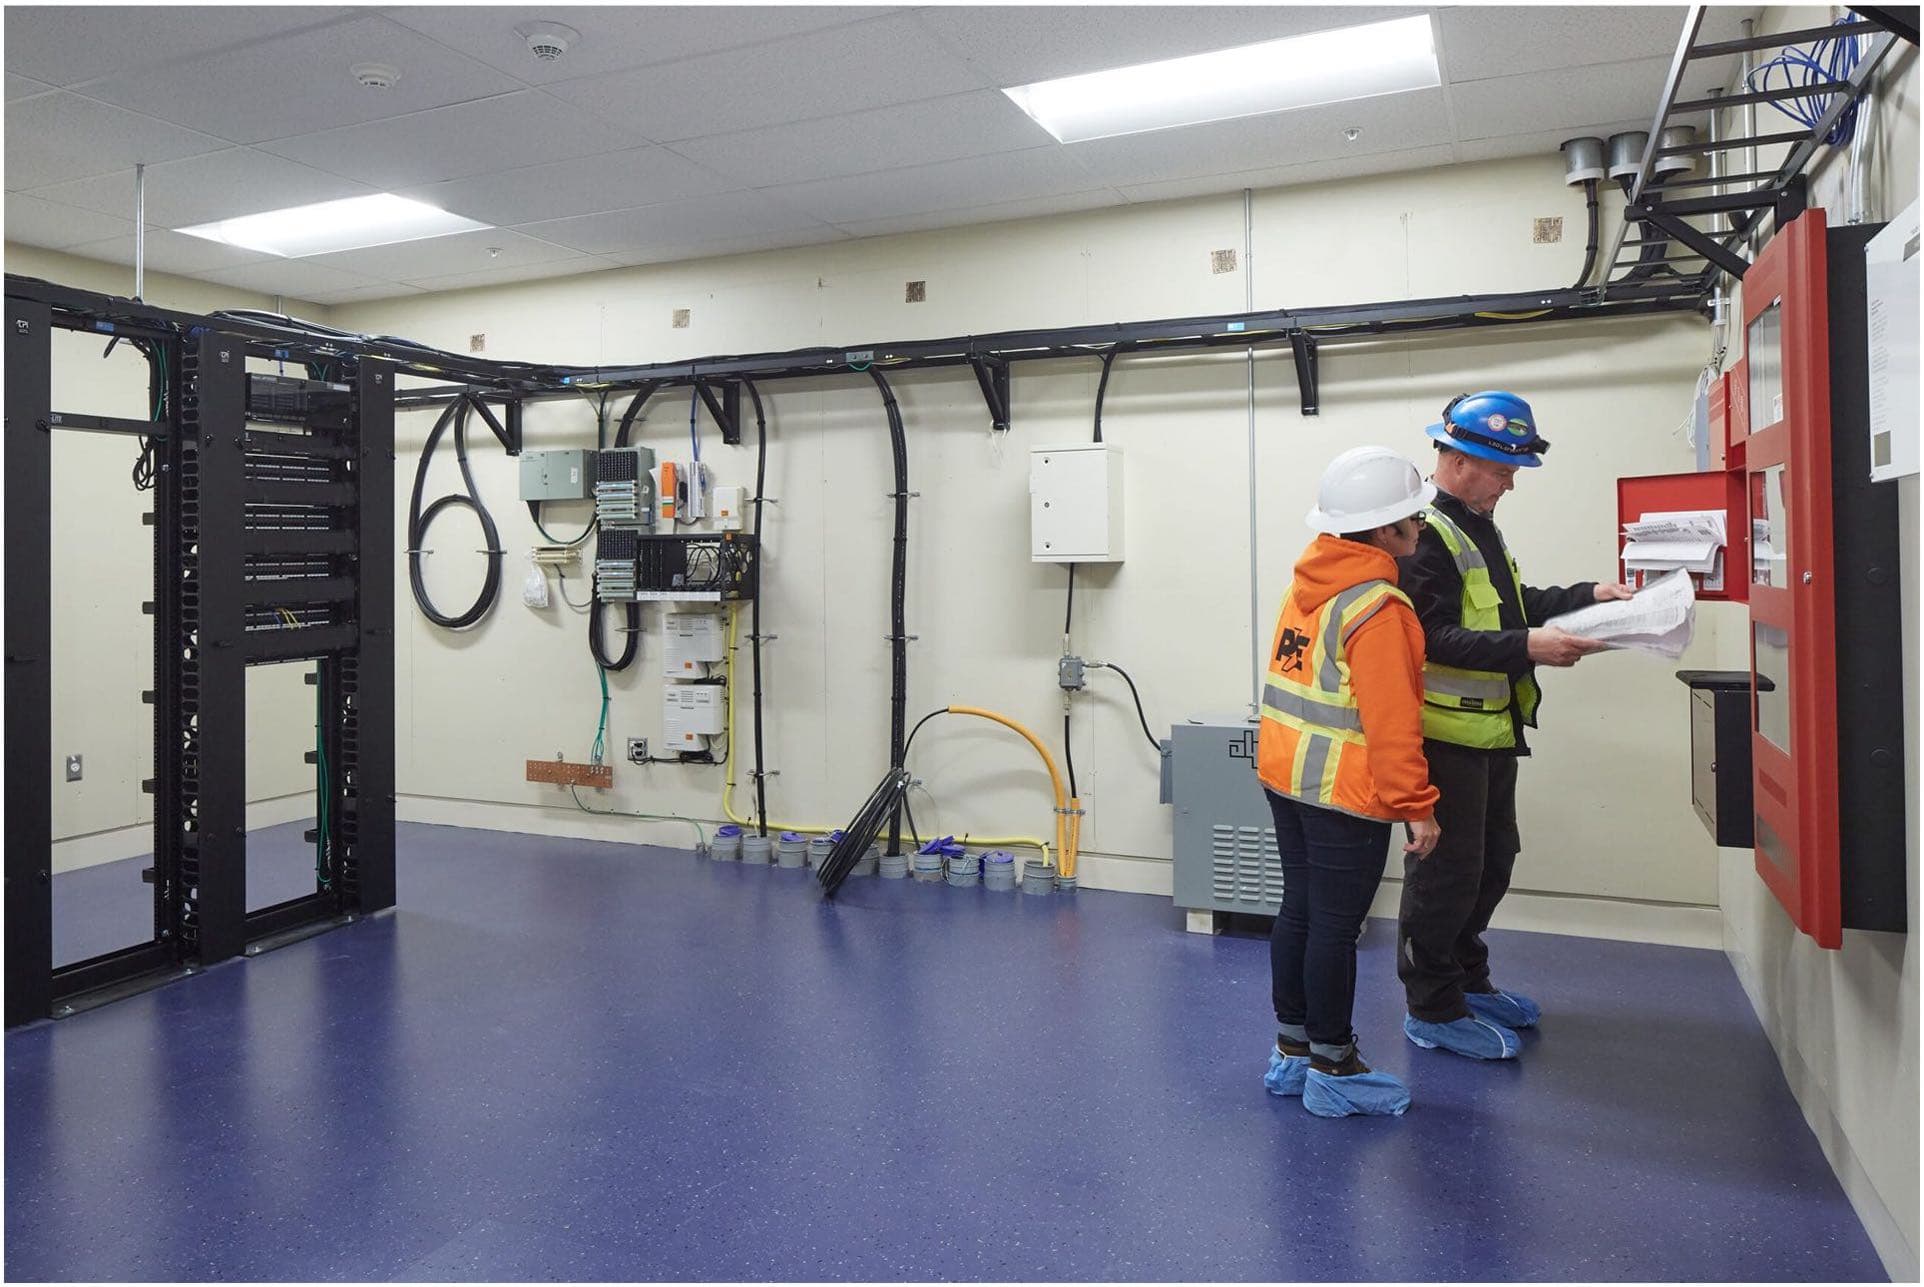 Two workers at a panels in a commercial setting to illustrate Commercial Maintenance and Troubleshooting